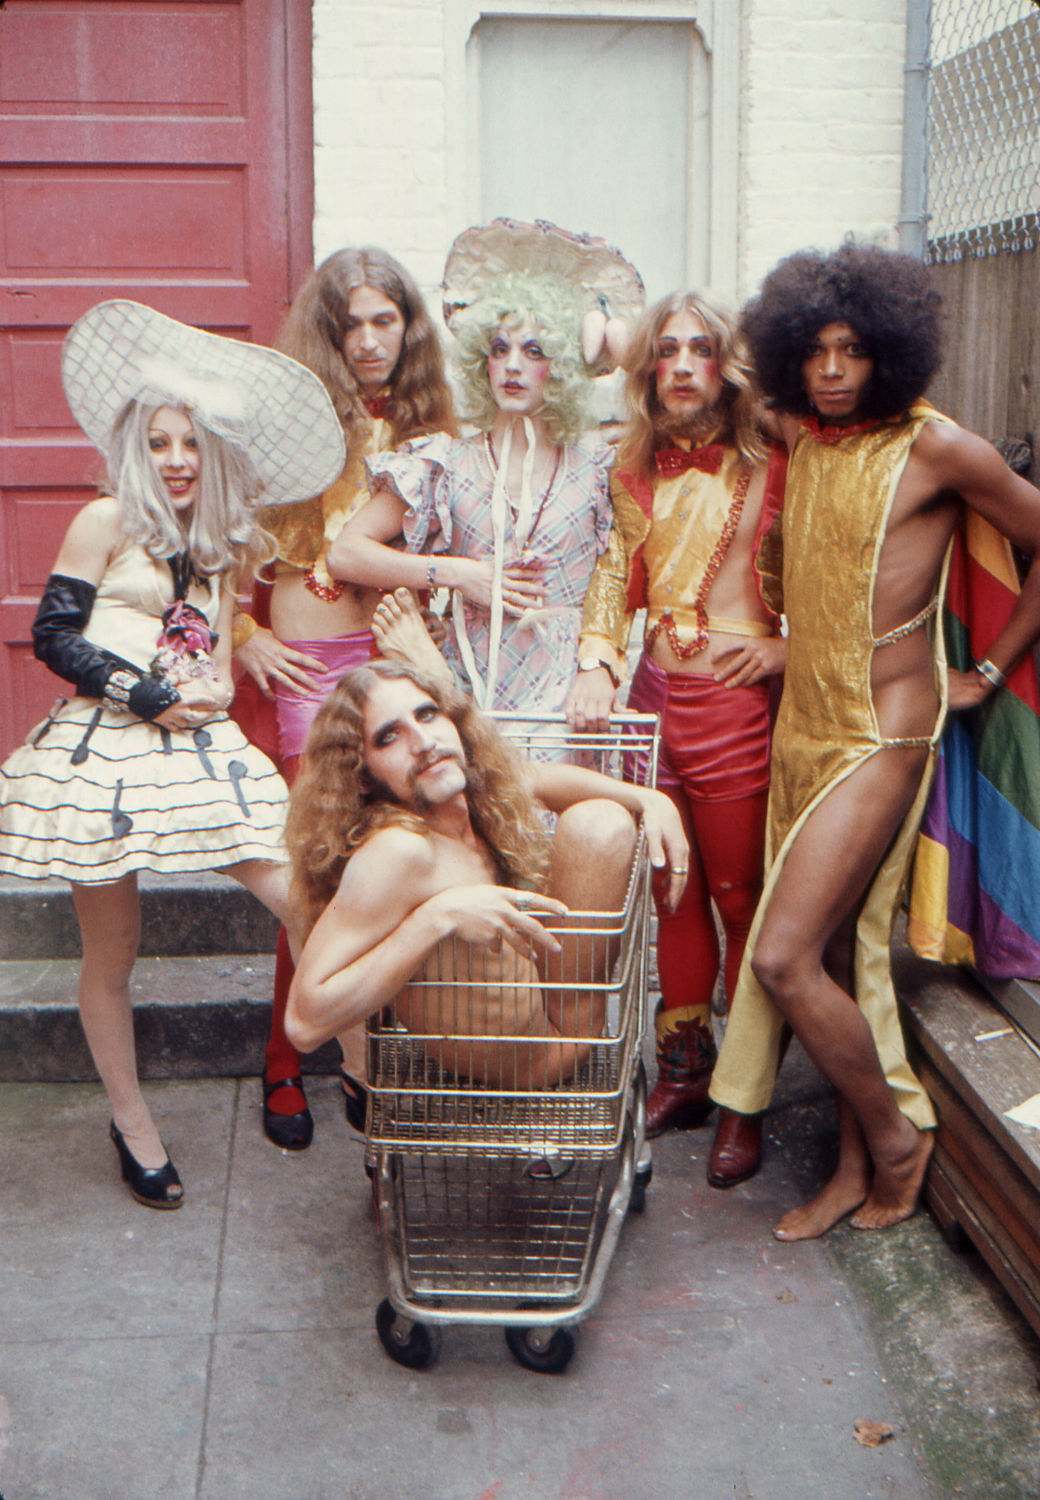 Clay Geerdes: Cockettes Go Shopping, 1972; digital print; 42 x 28 in.; courtesy David Miller, from the estate of Clay Geerdes.